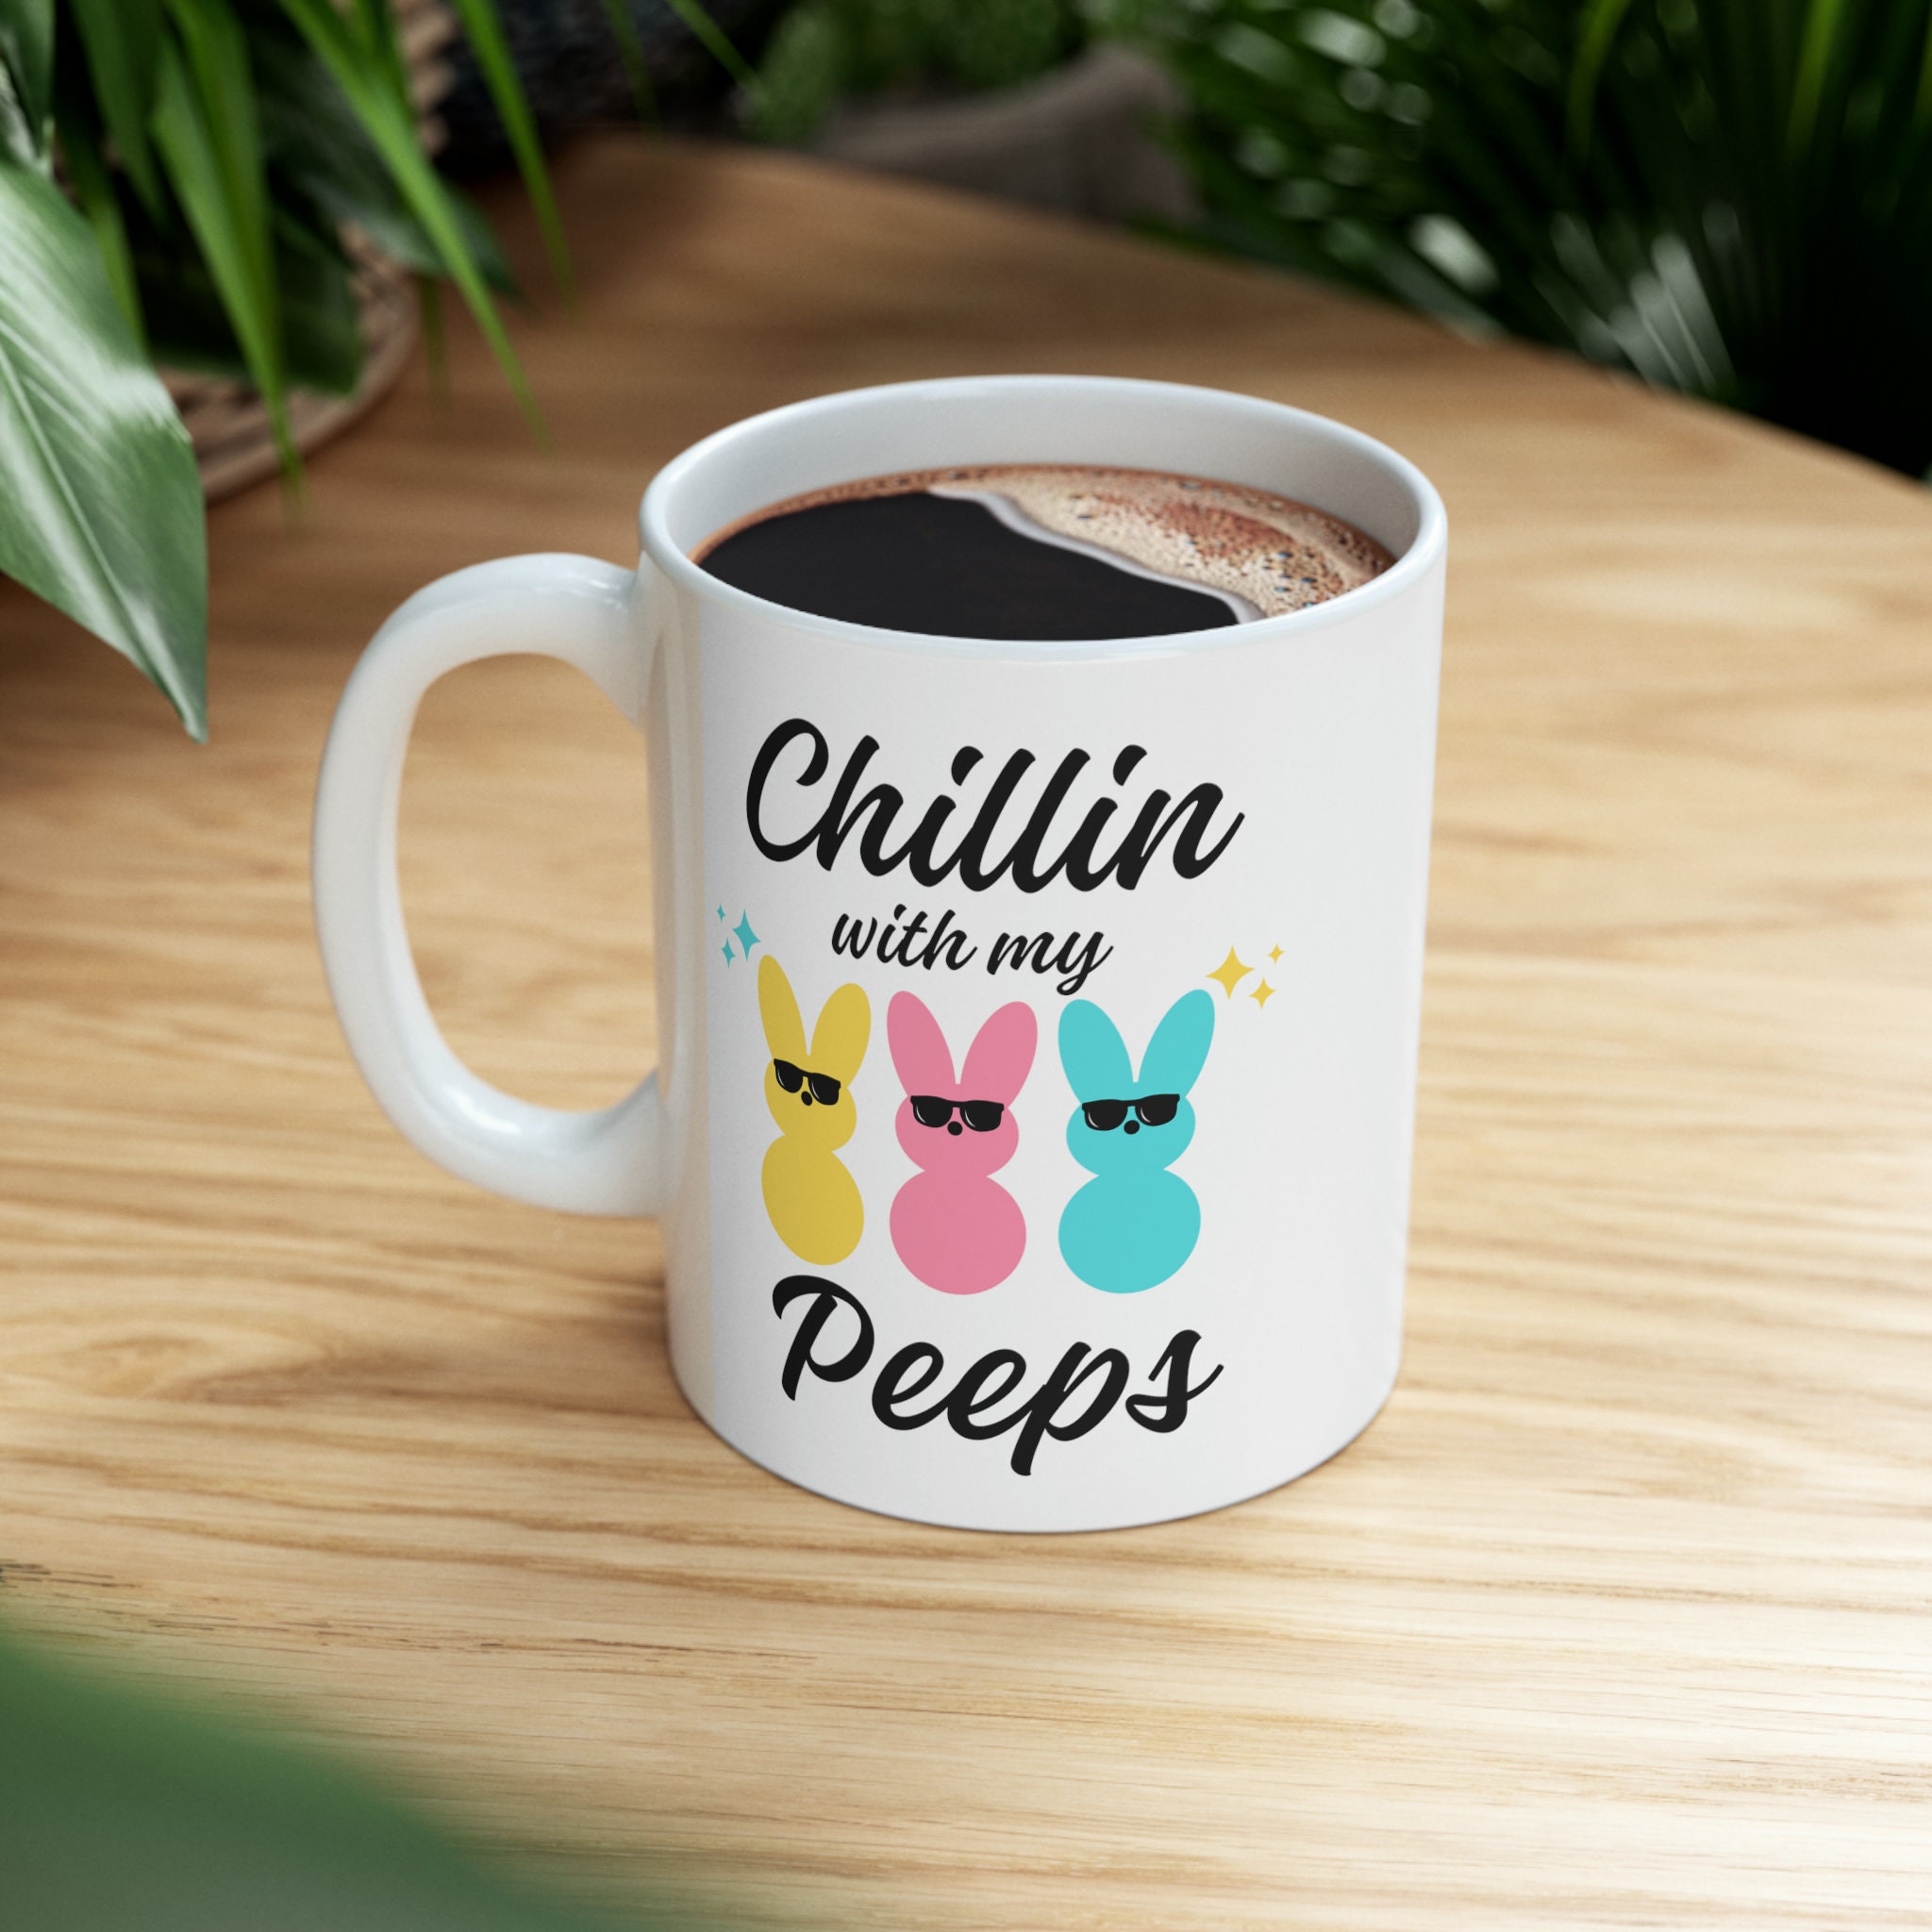 Chillin With My Peeps, Easter Spring Coffee Mug, Cute Spring Kitchen Decor, Easter Decor, Easter Tea Cup, Spring Housewarming Gifts, Easter